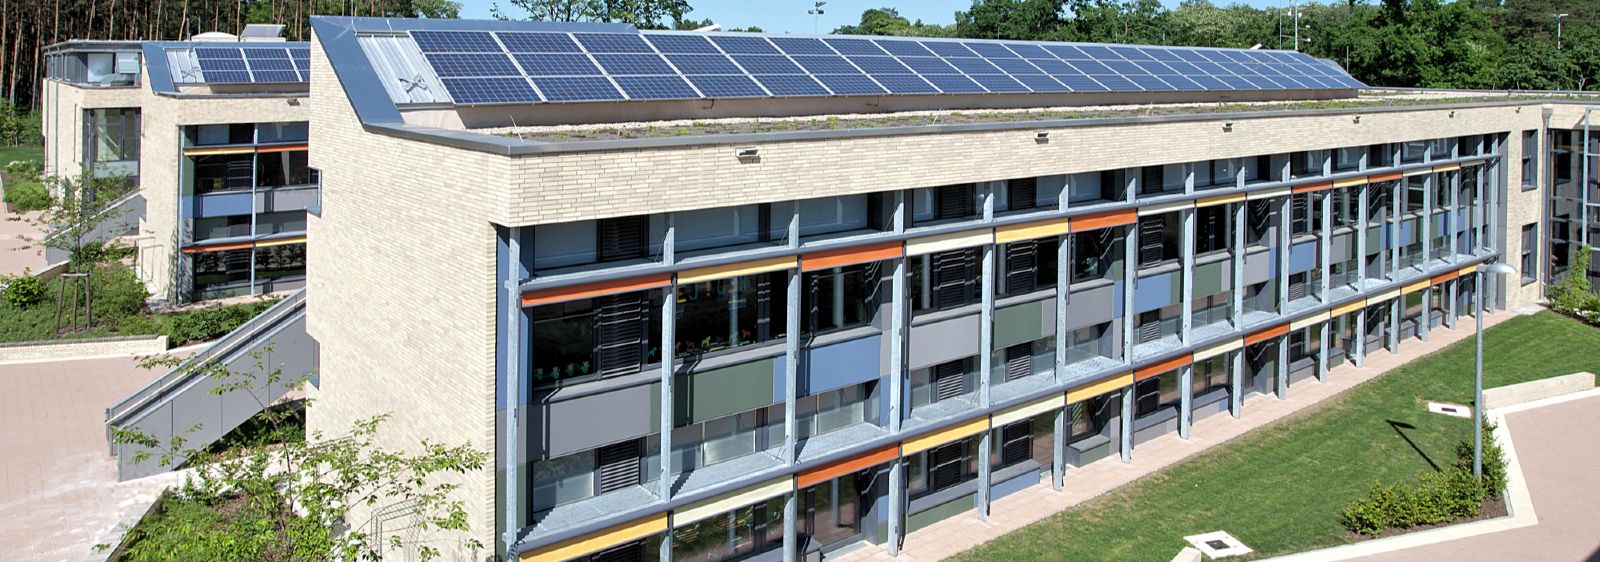 The new building of the Niederheide primary school consumes little energy during operation, with good air quality in the classroom and a pleasant indoor climate.